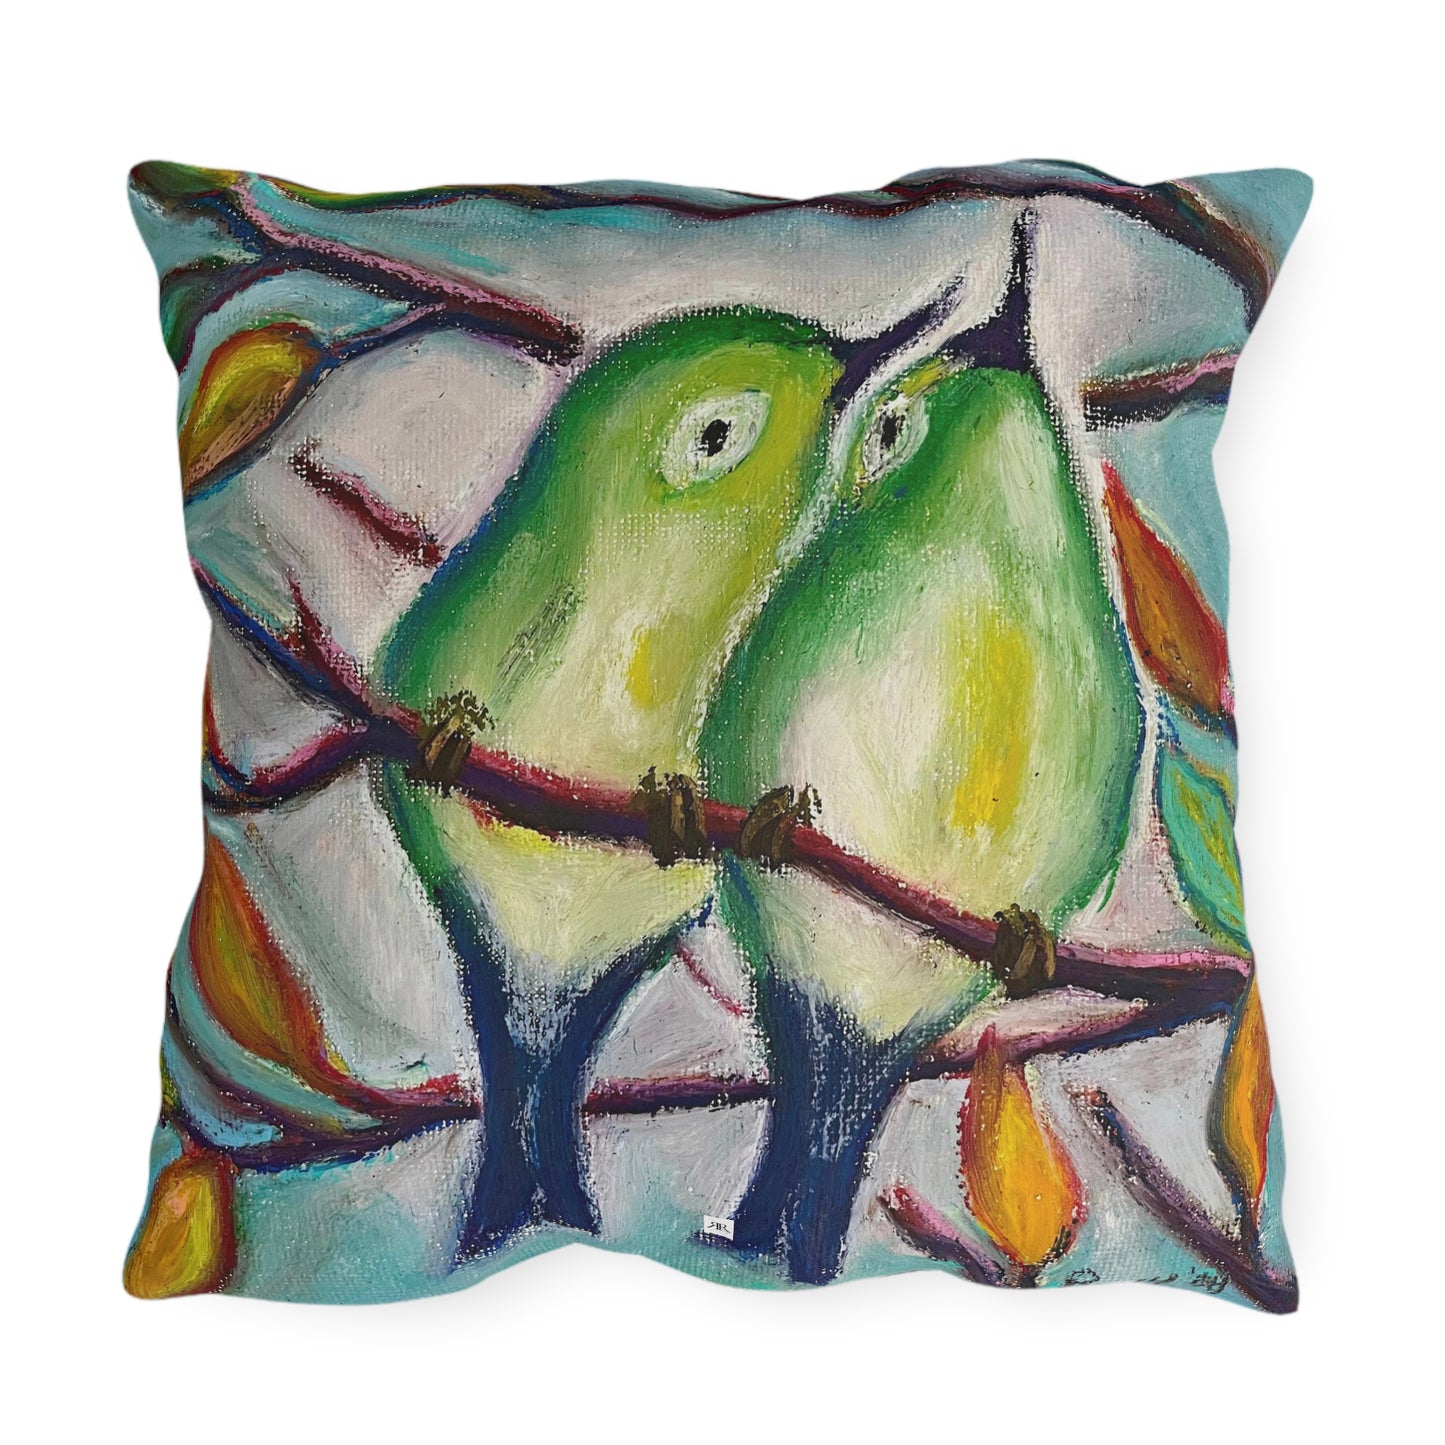 Cuddling Warblers Outdoor Pillows